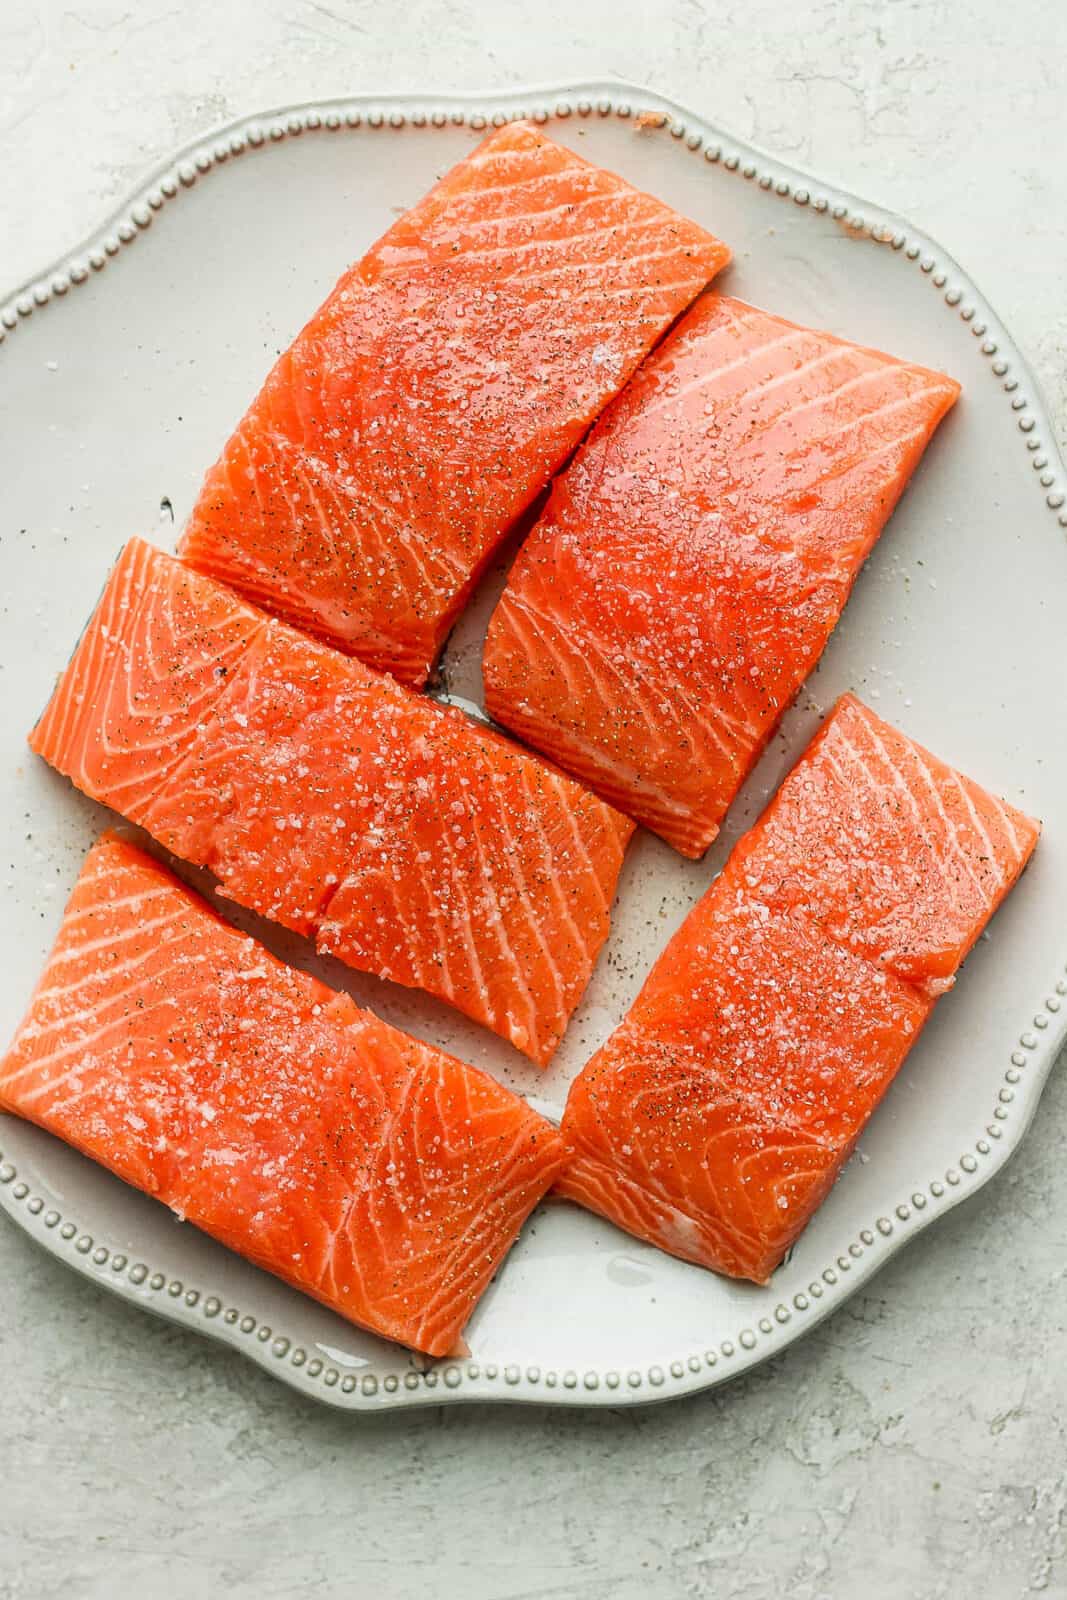 The salmon fillets seasoned with salt and pepper on a plate.